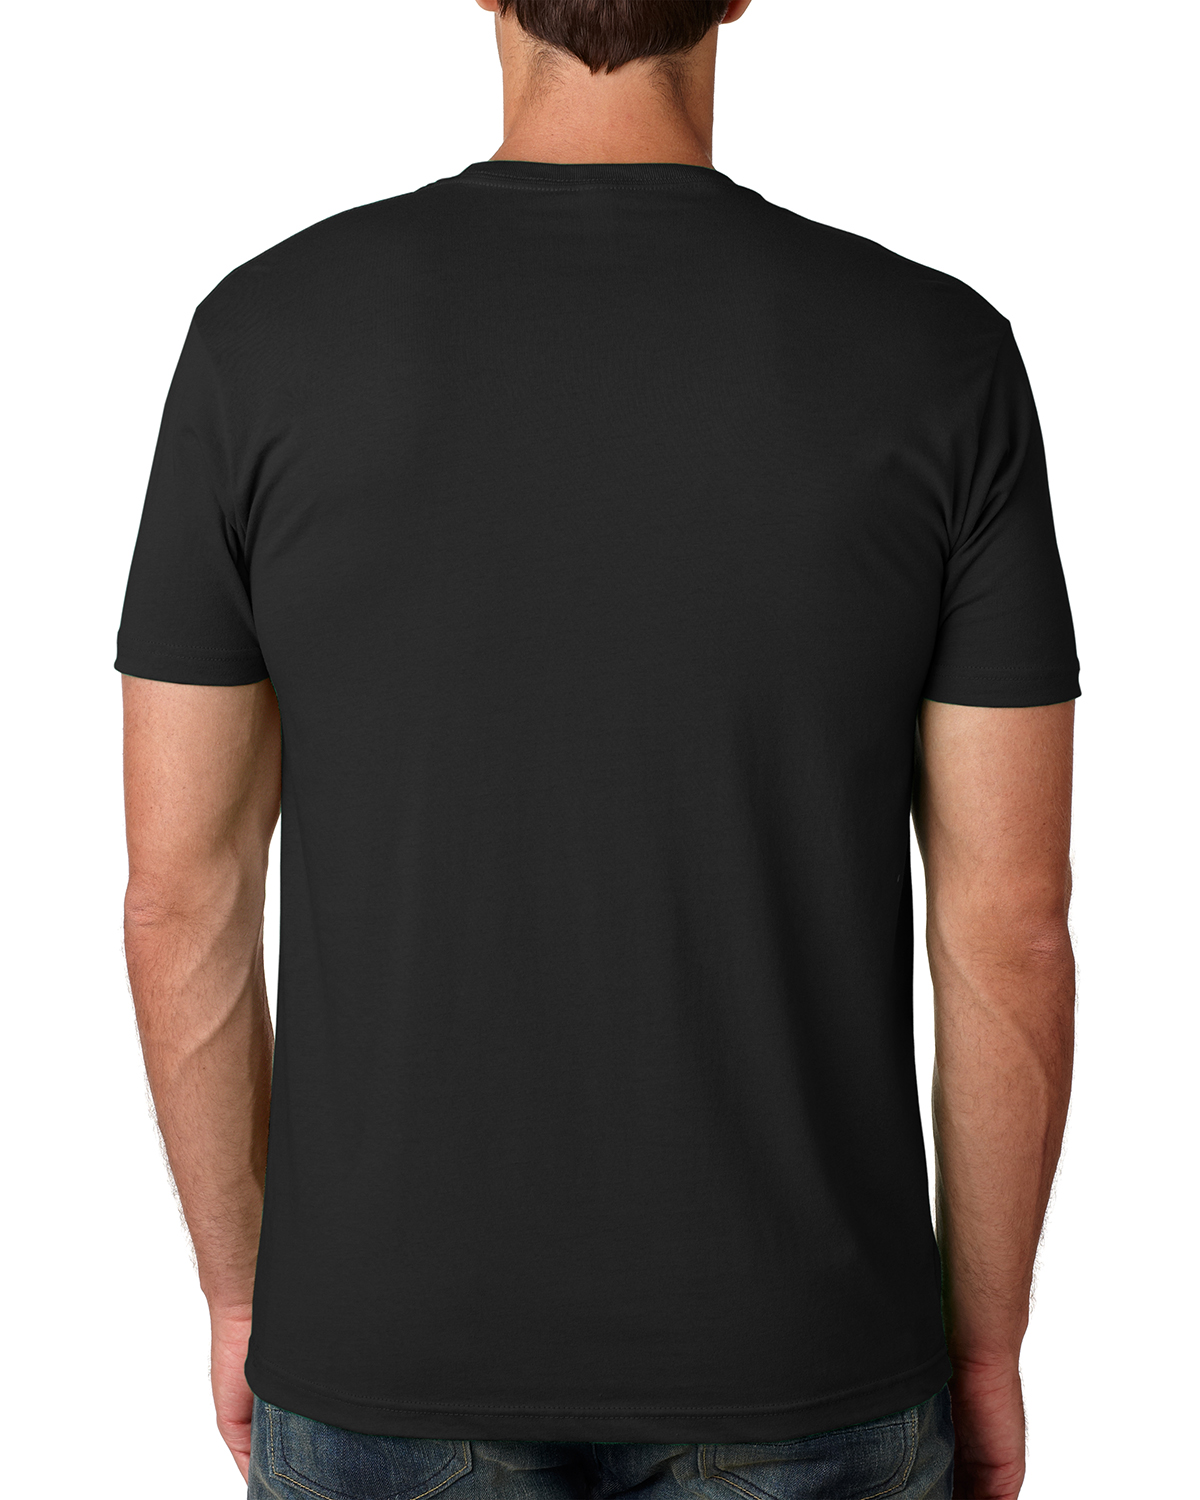 5 x Crewman Crew Tee Shirts Made Of 100% Cotton RRP 14.95 Each 1 Of Each Color 